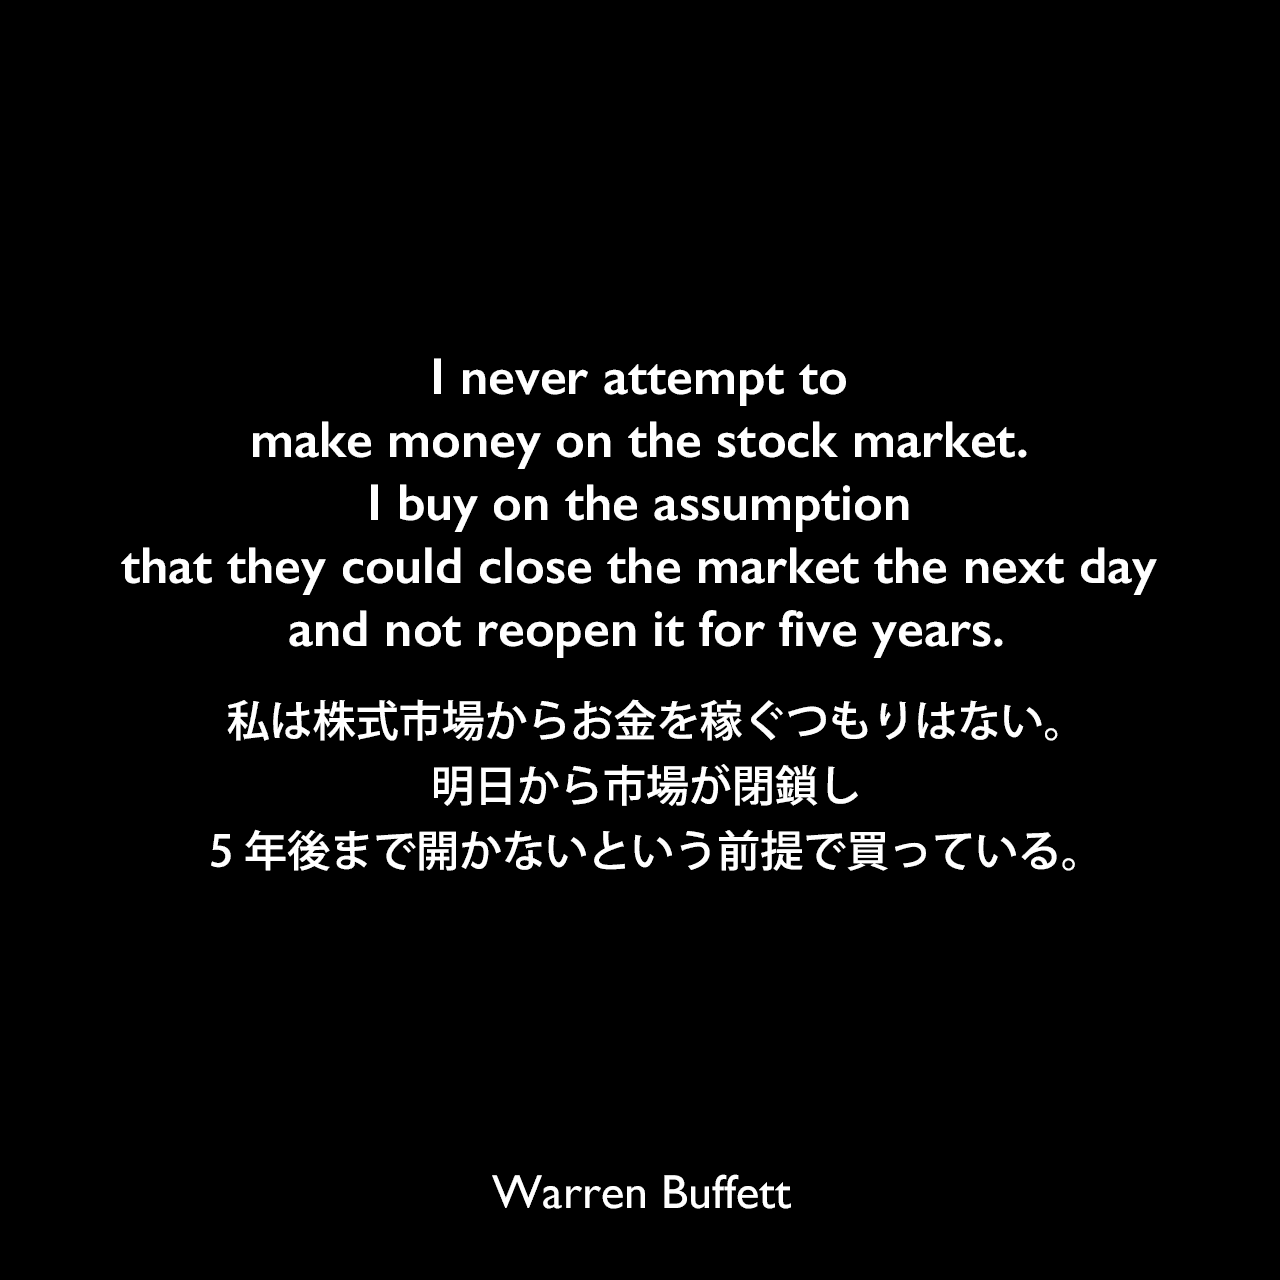 I never attempt to make money on the stock market. I buy on the assumption that they could close the market the next day and not reopen it for five years.私は株式市場からお金を稼ぐつもりはない。明日から市場が閉鎖し、5年後まで開かないという前提で買っている。Warren Buffett